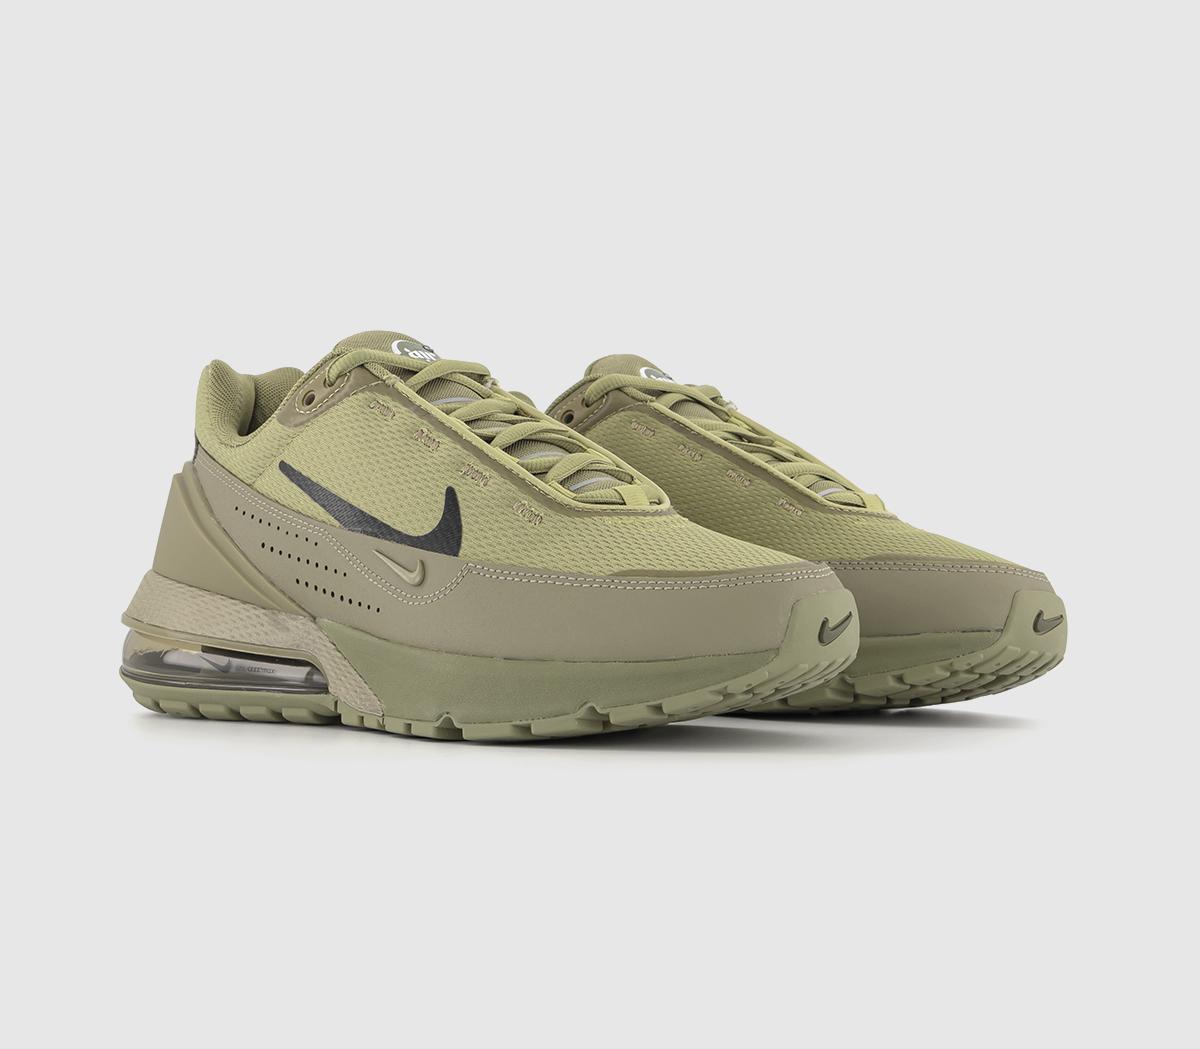 Nike Air Max Pulse Trainers Neutral Olive Black Medium Olive Neutral Olive Neu, 9.5